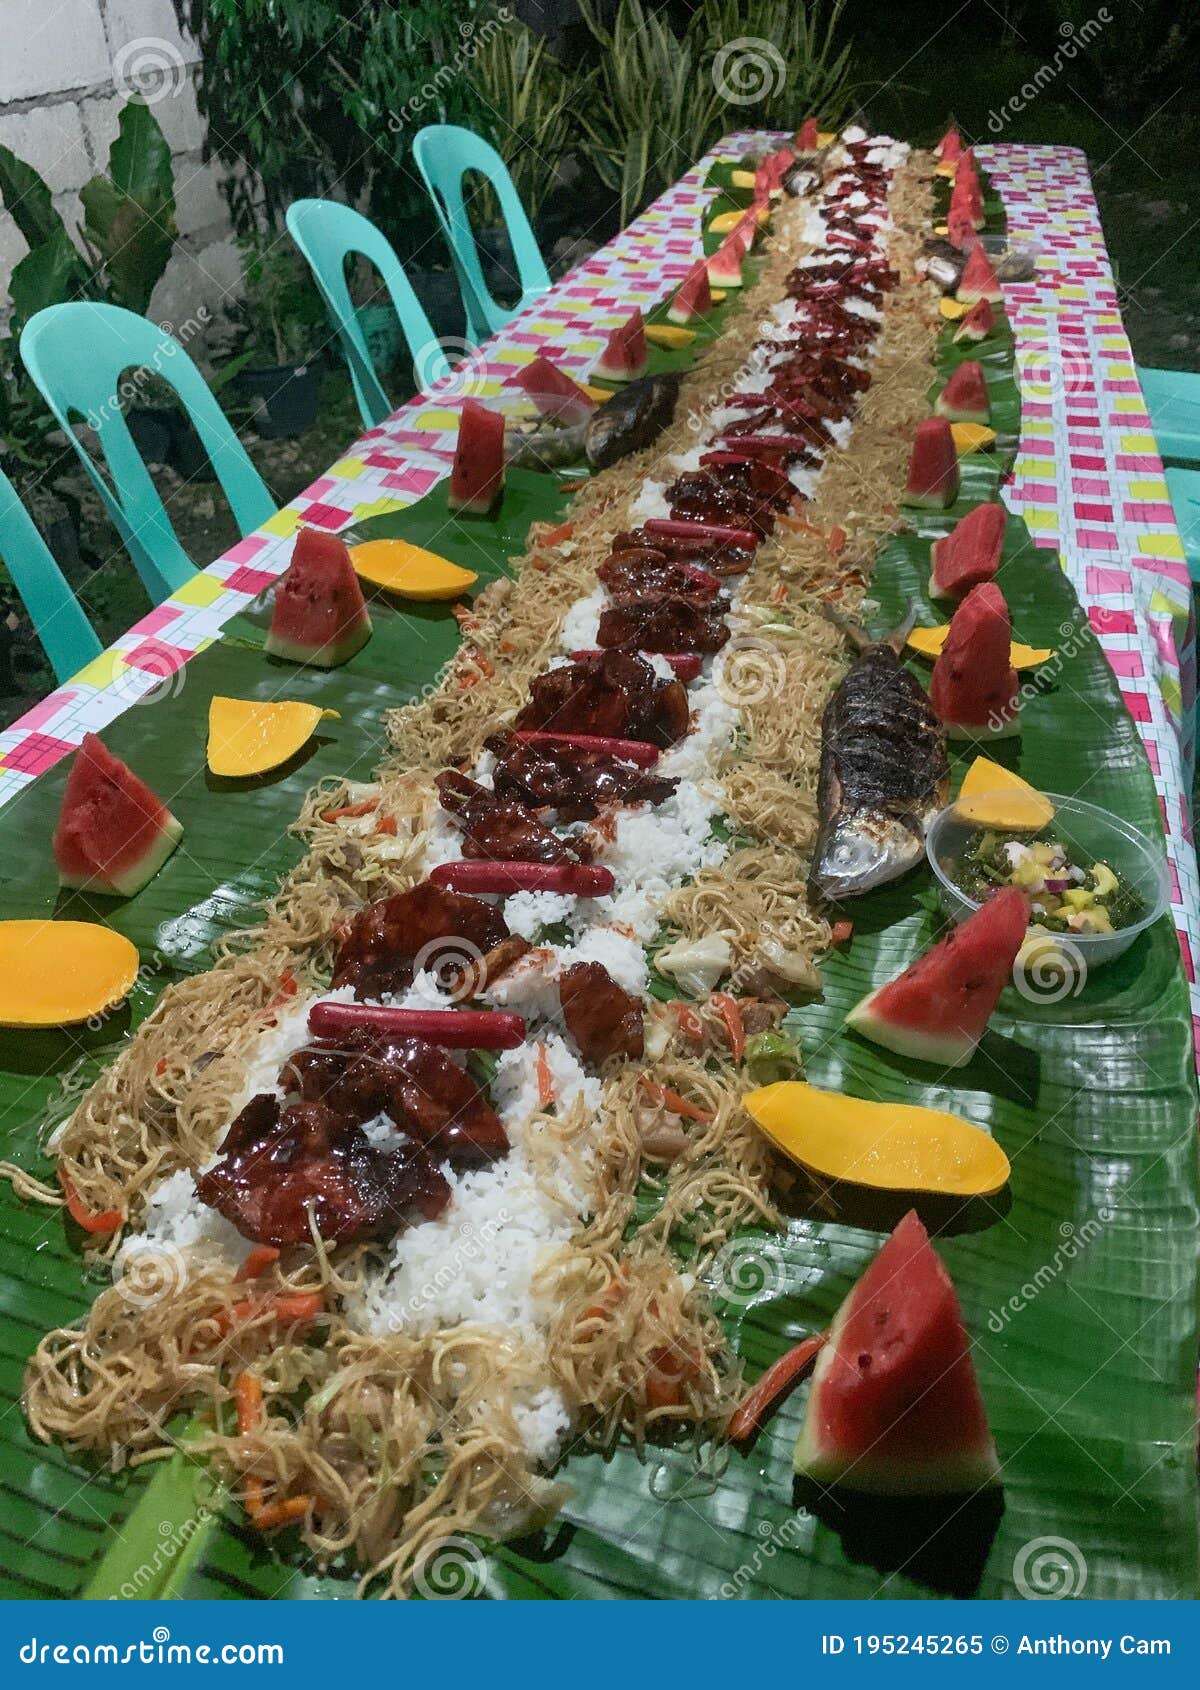 Called Kamayan Photos Free Royalty Free Stock Photos From Dreamstime A special dinner where food is laid out onto banana leaves and shared! dreamstime com